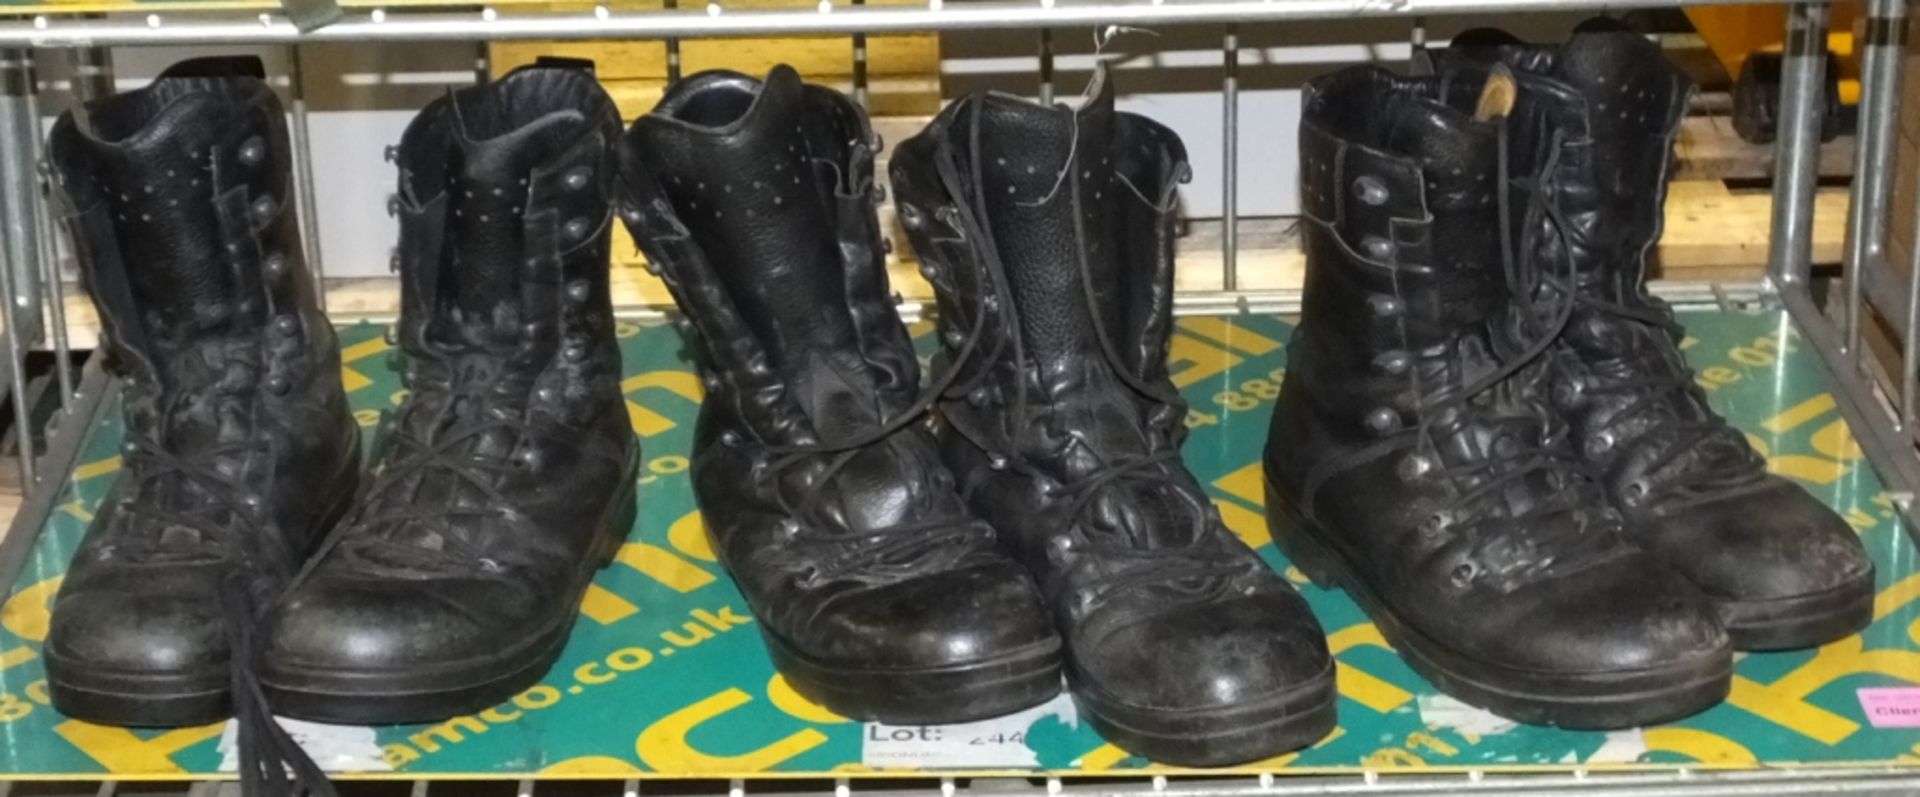 3x Heavy duty boots - German Para - unknown sizes